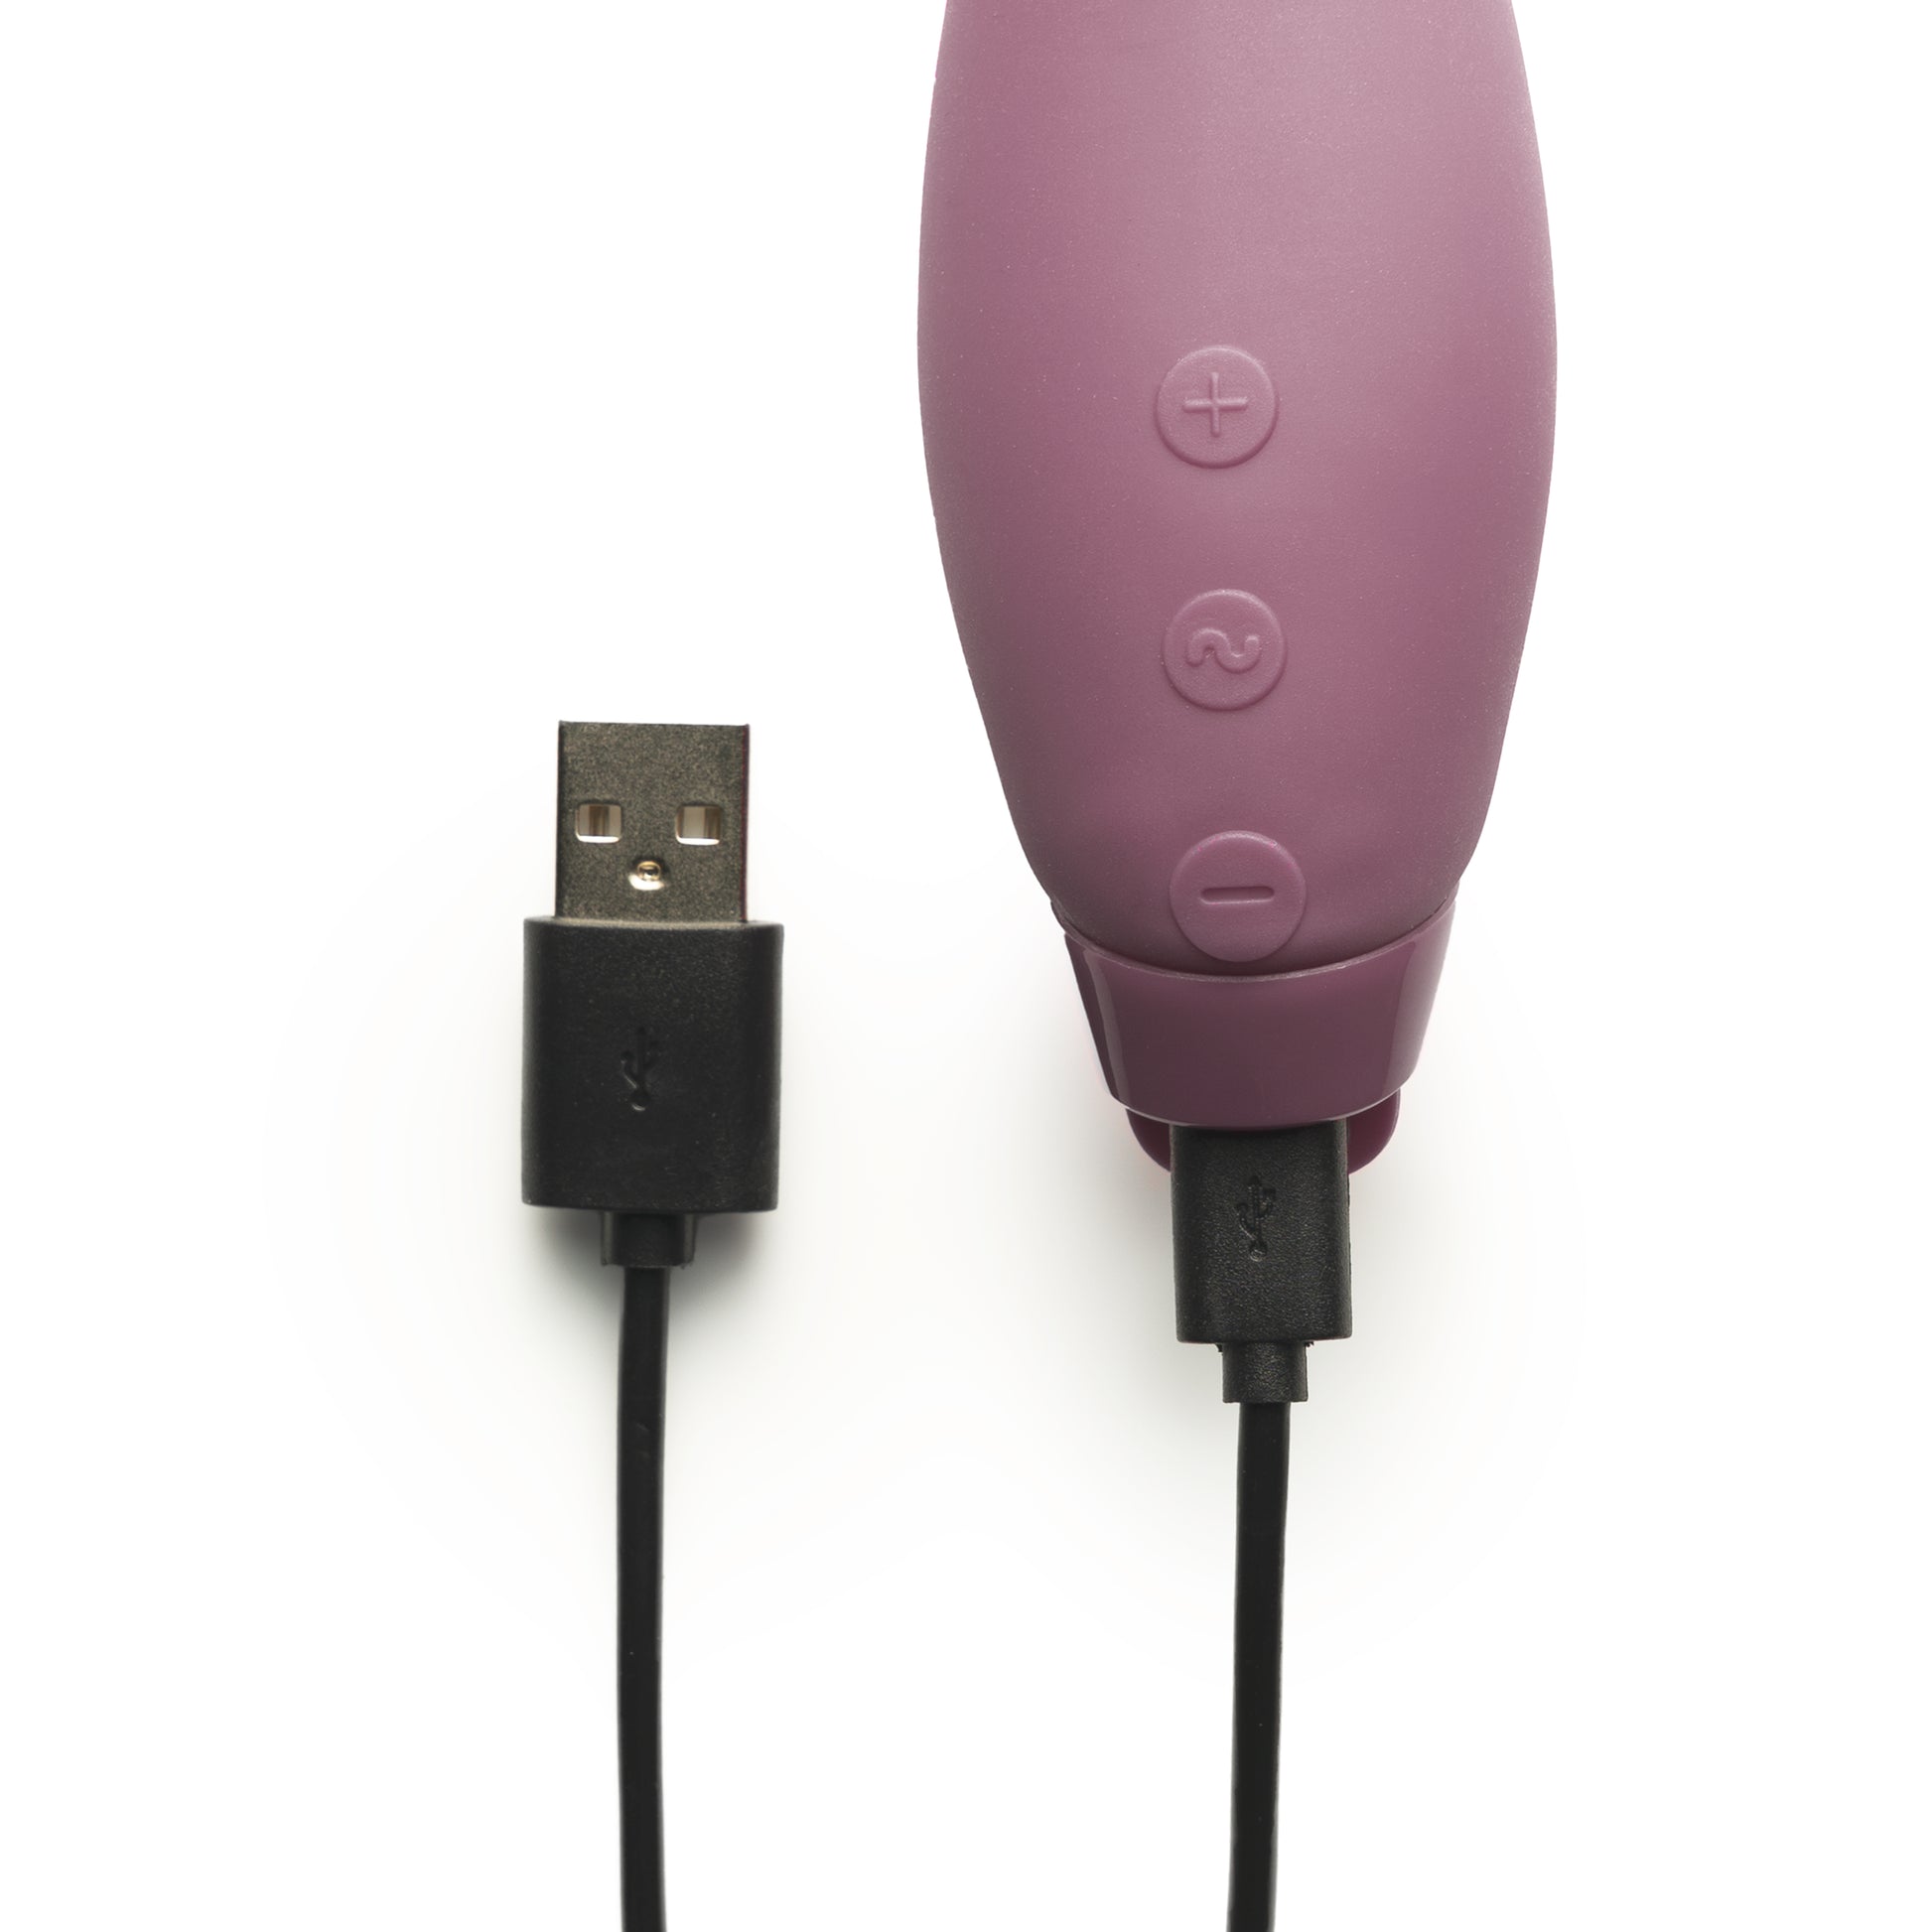 Purple Hera vibrator with charger attached 